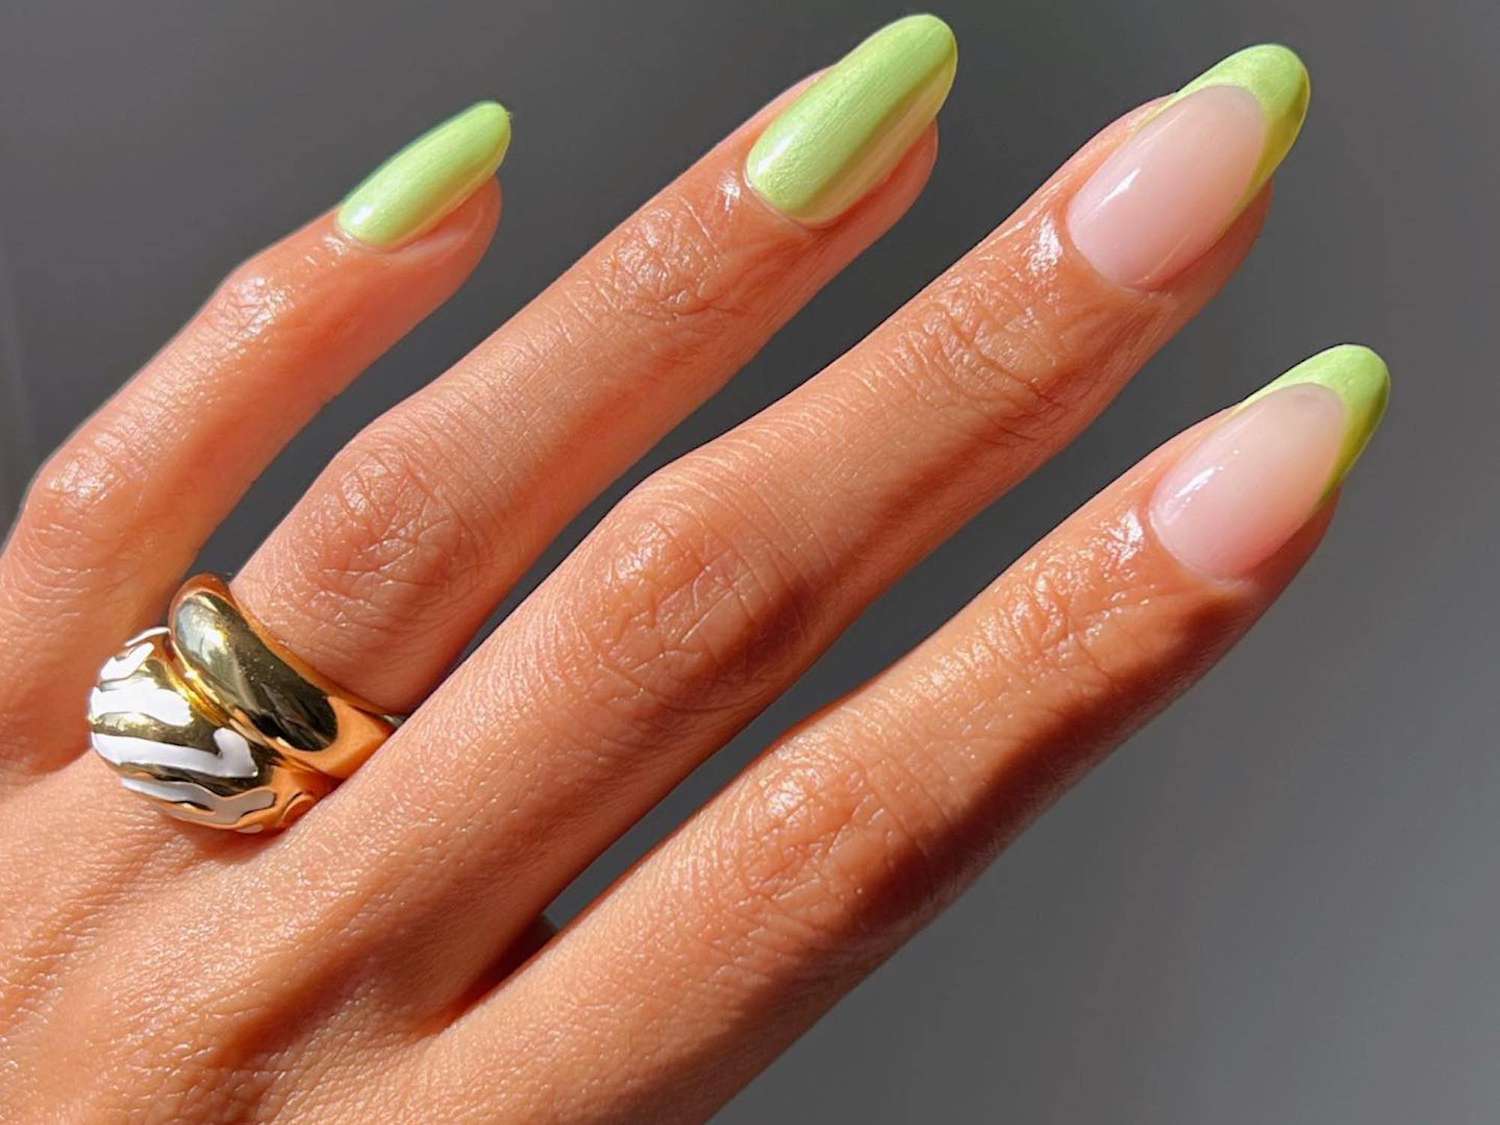 Top Spring Nail Trends For 2023: Get Creative And Stay Ahead Of The Game!